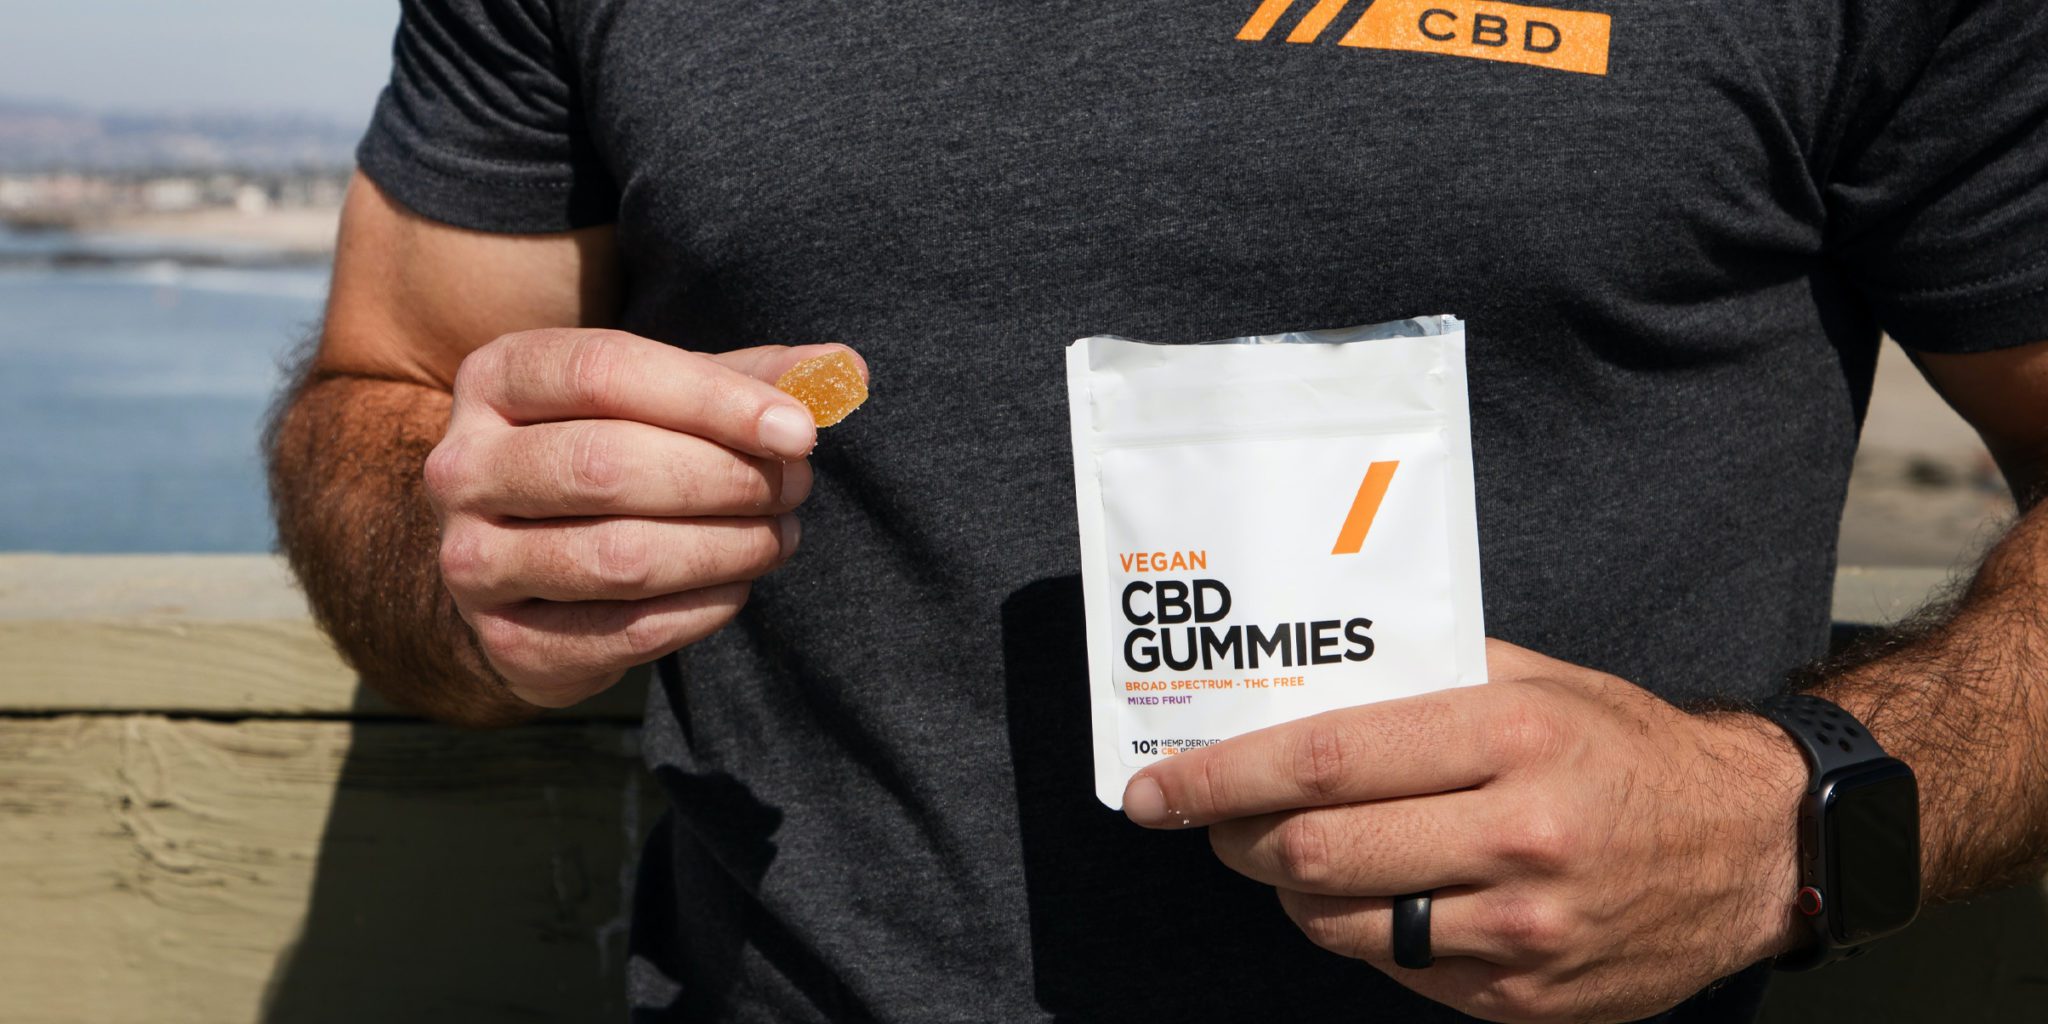 closeup of man's hand holding CBD gummies, one gummy on the right hand and pack of gummies on the other hand